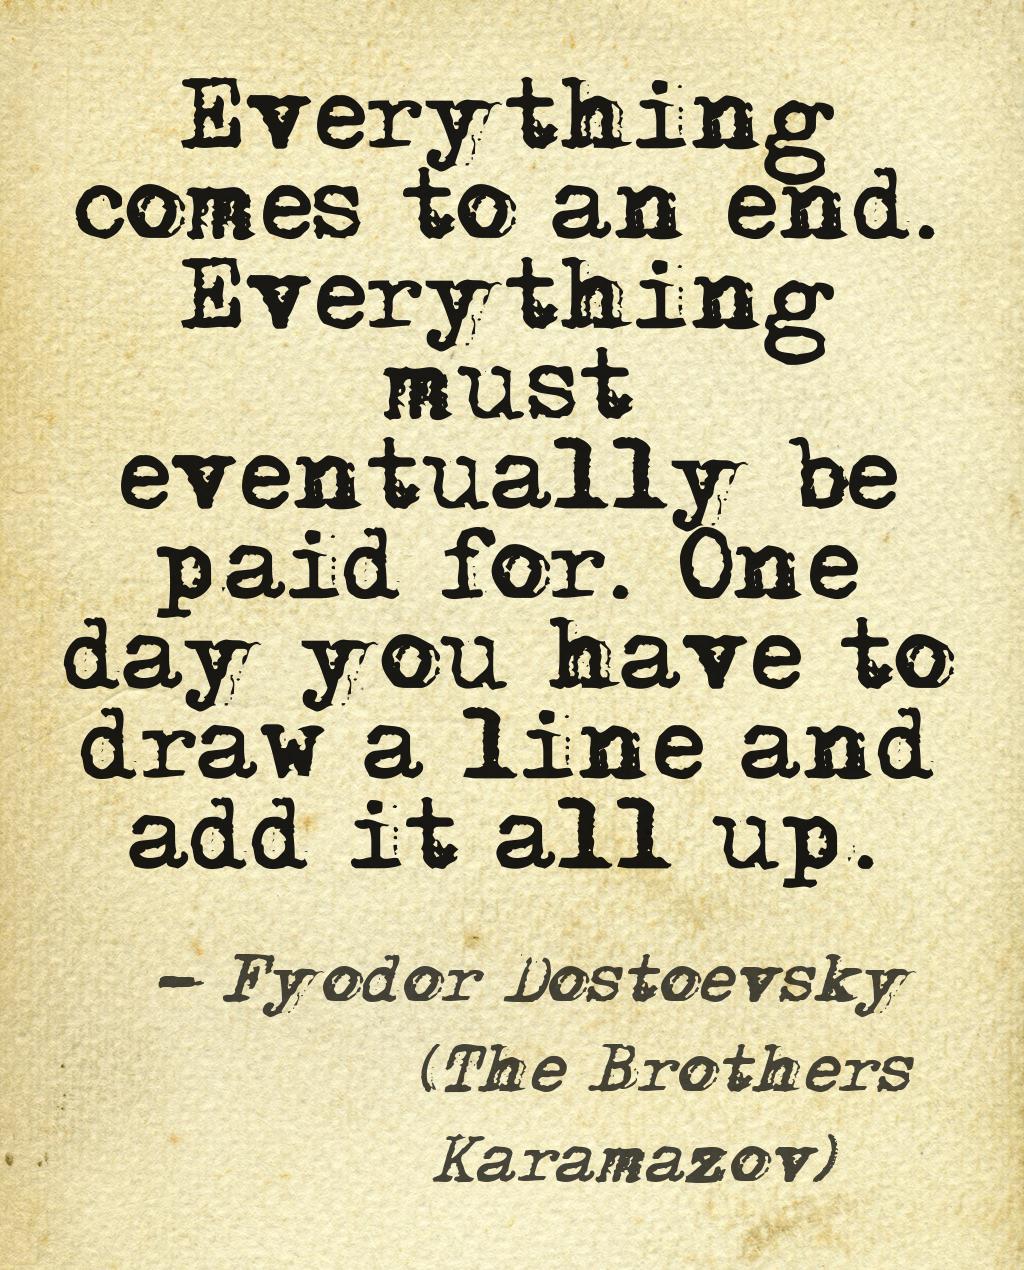 10 life lessons we can learn from Fyodor Dostoyevsky | Art-Sheep